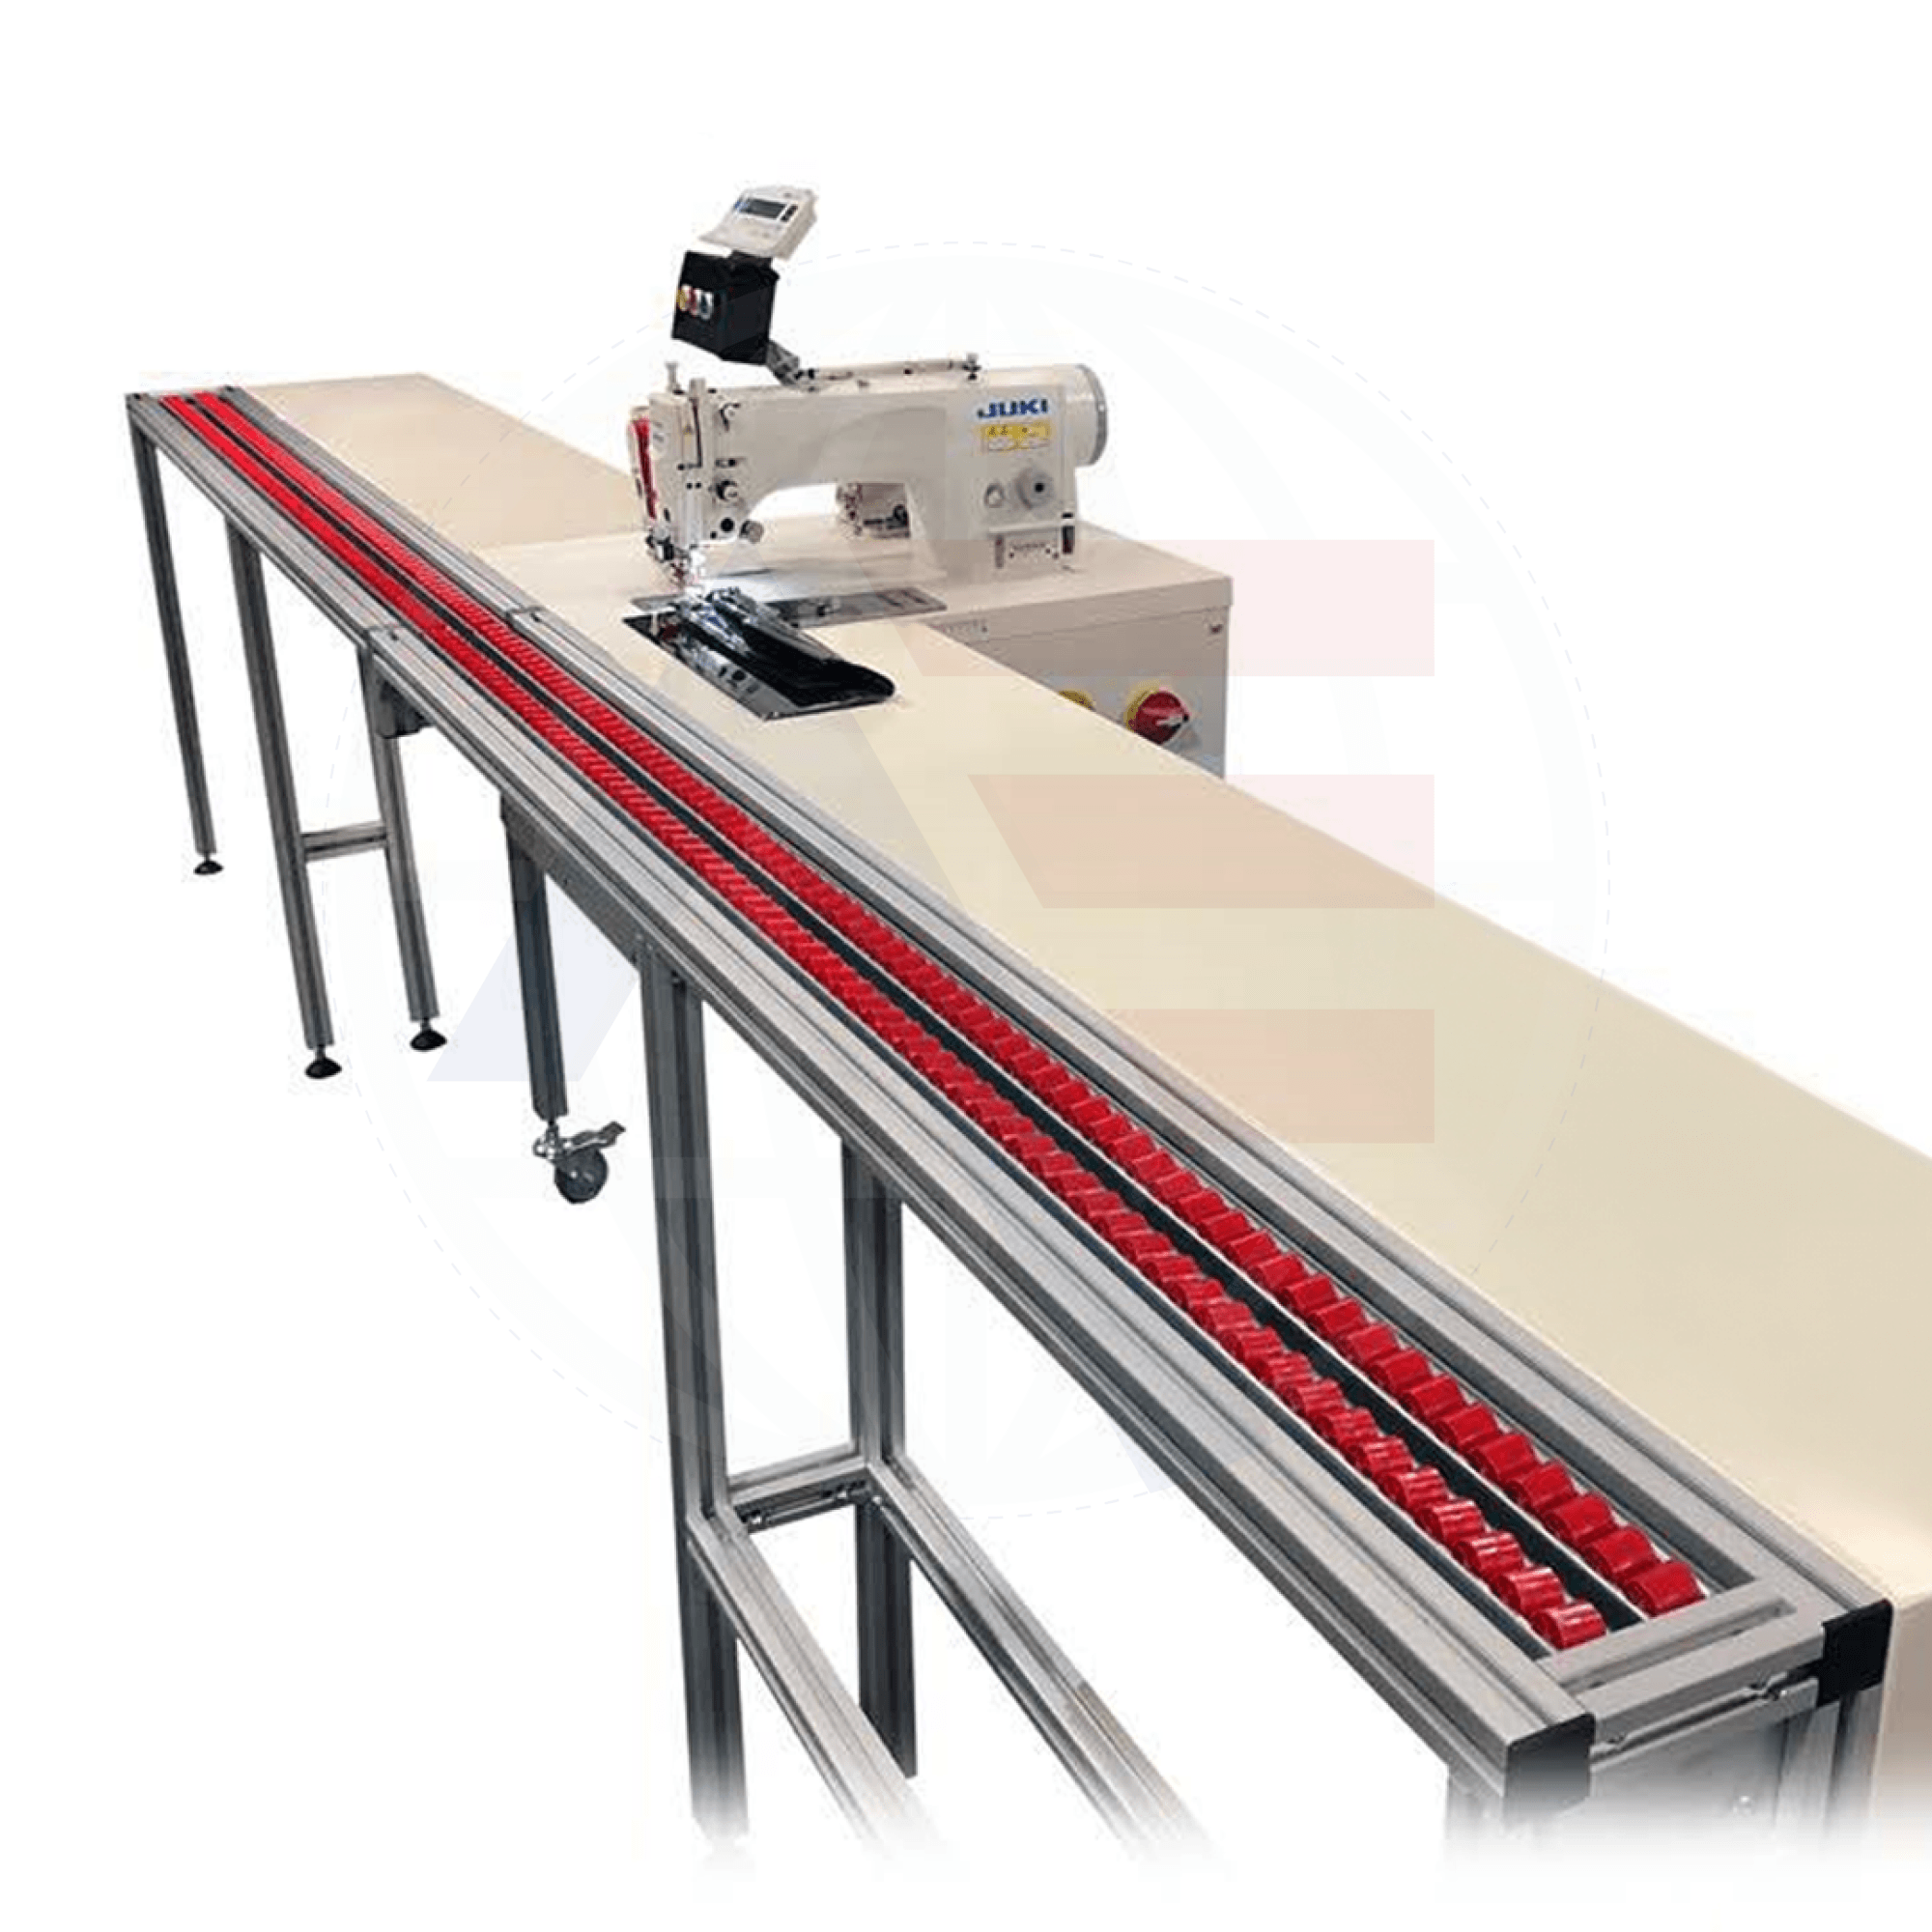 Advance Asa-Rbs4000 Roller Blind Sewing Station